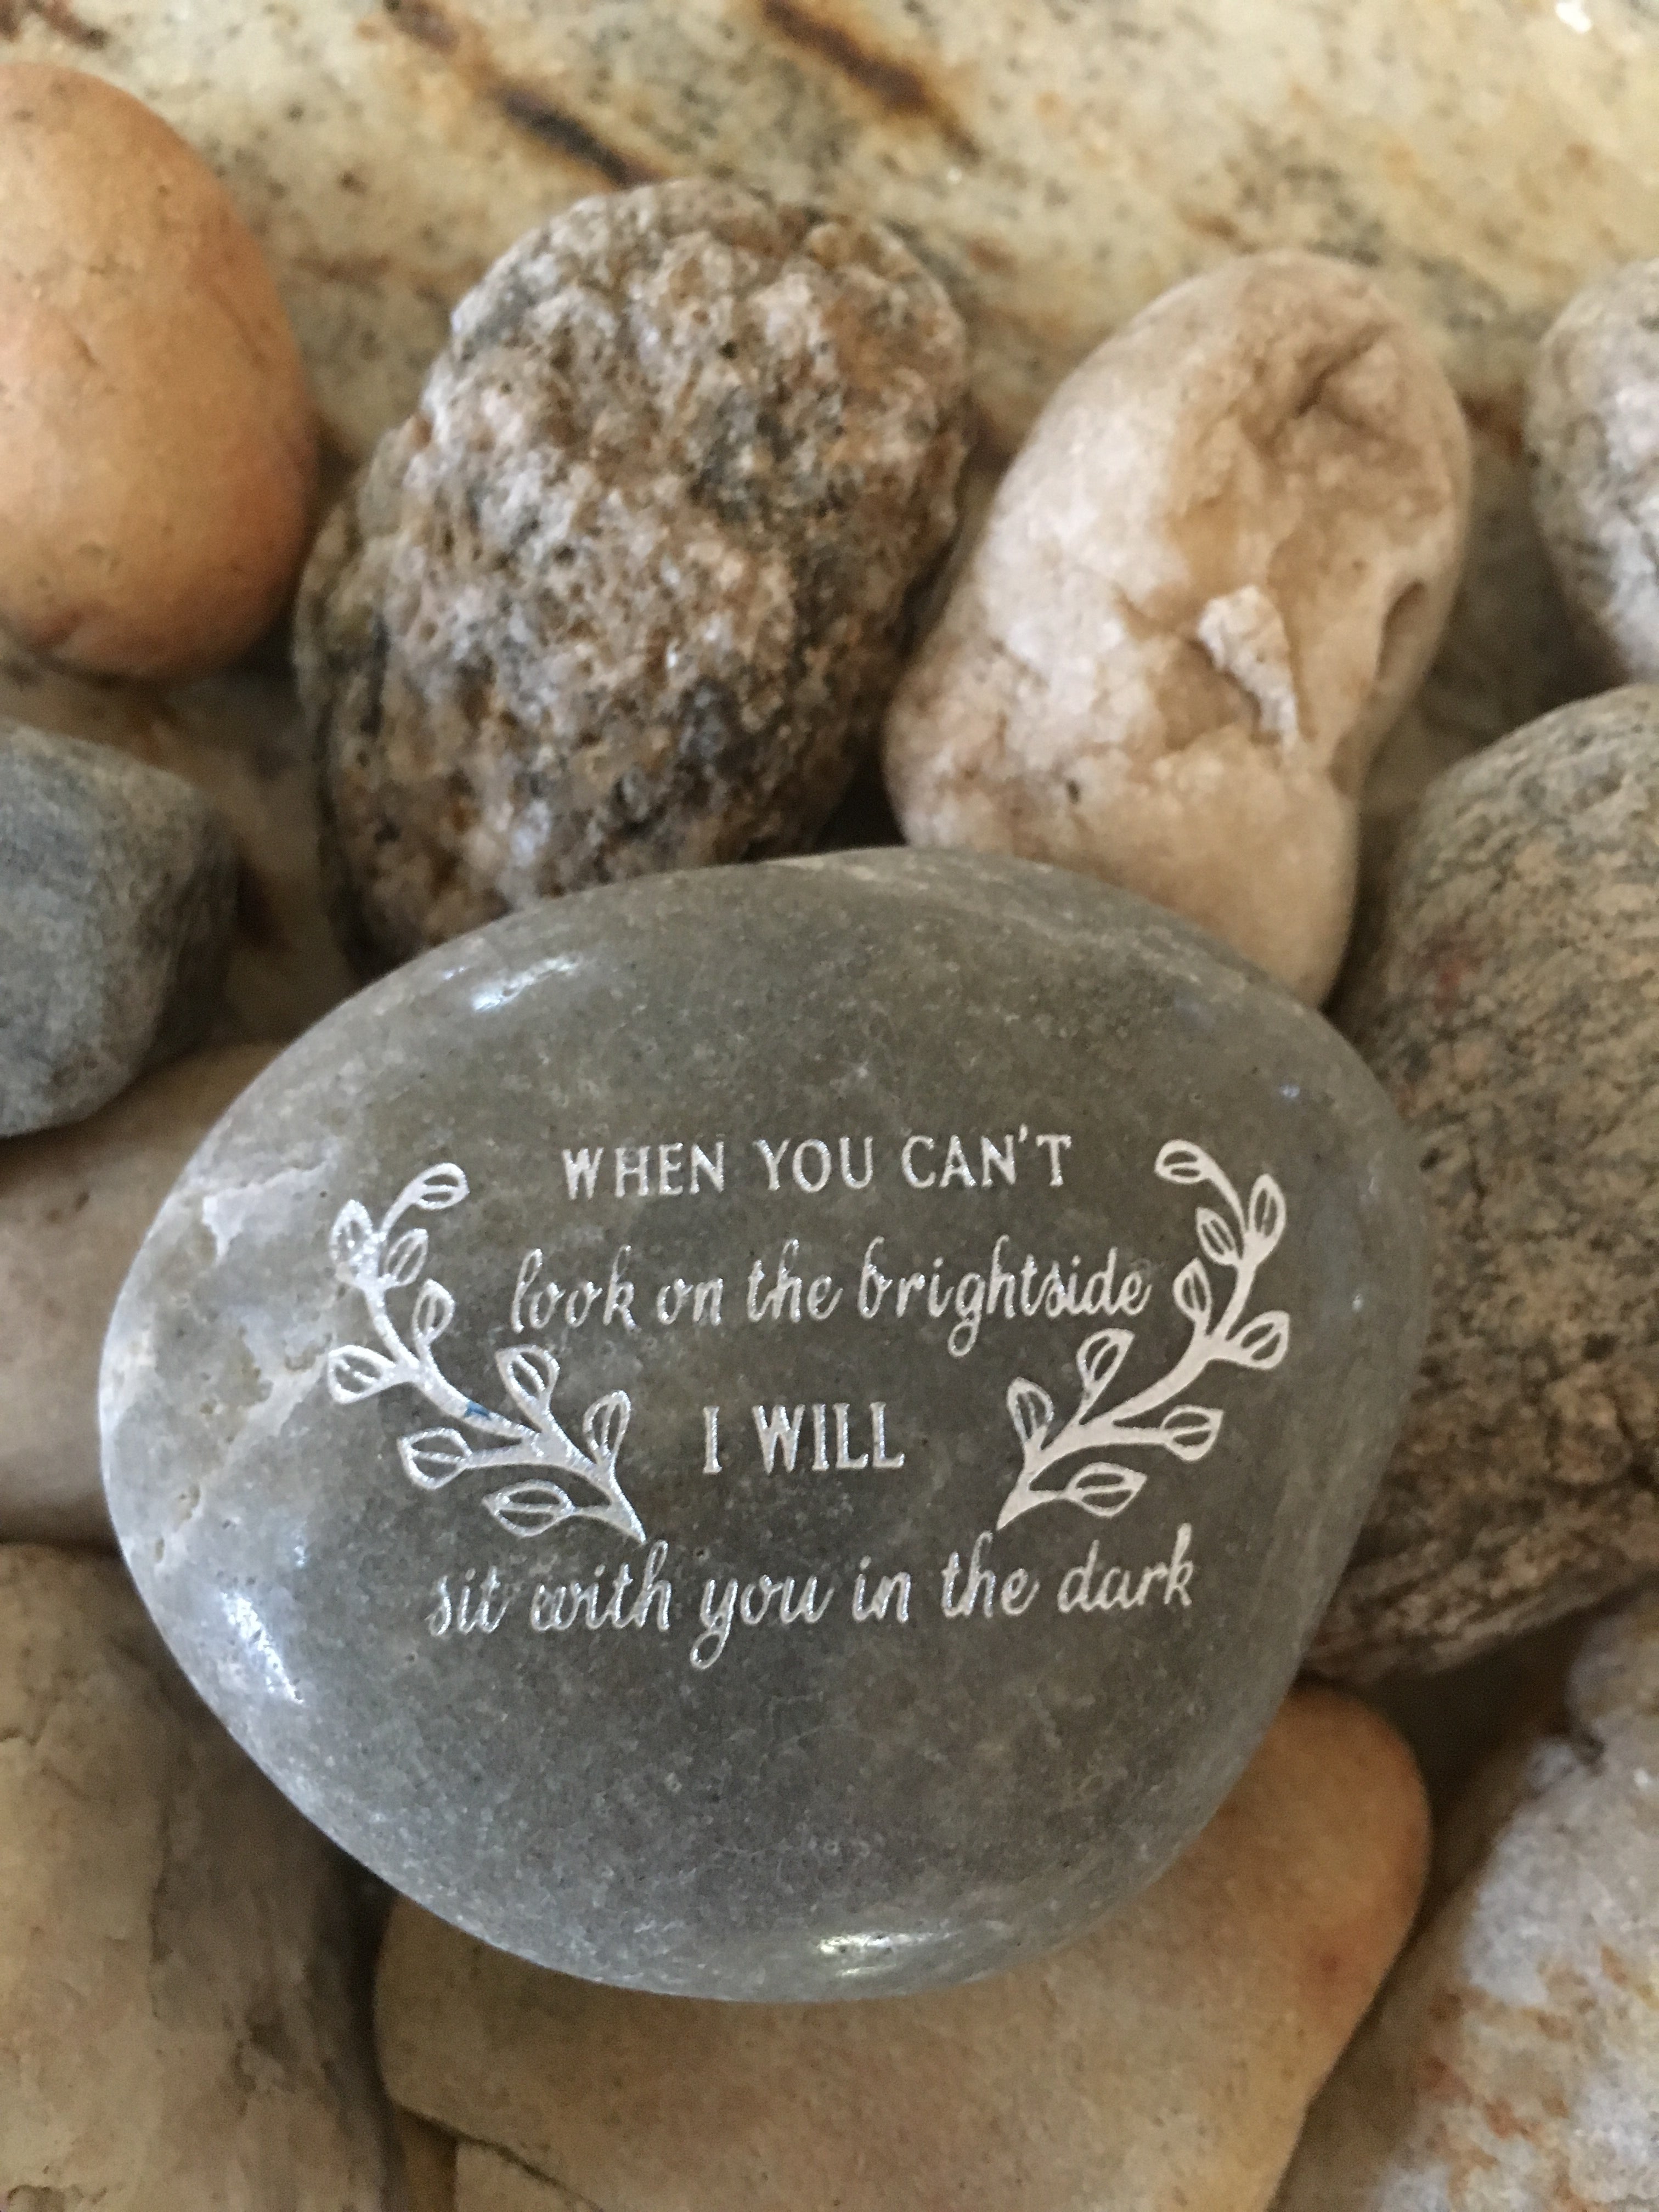 When you Can't Look On The Brightside I Will Sit With You In The Dark ~ Engraved Inspirational Rock